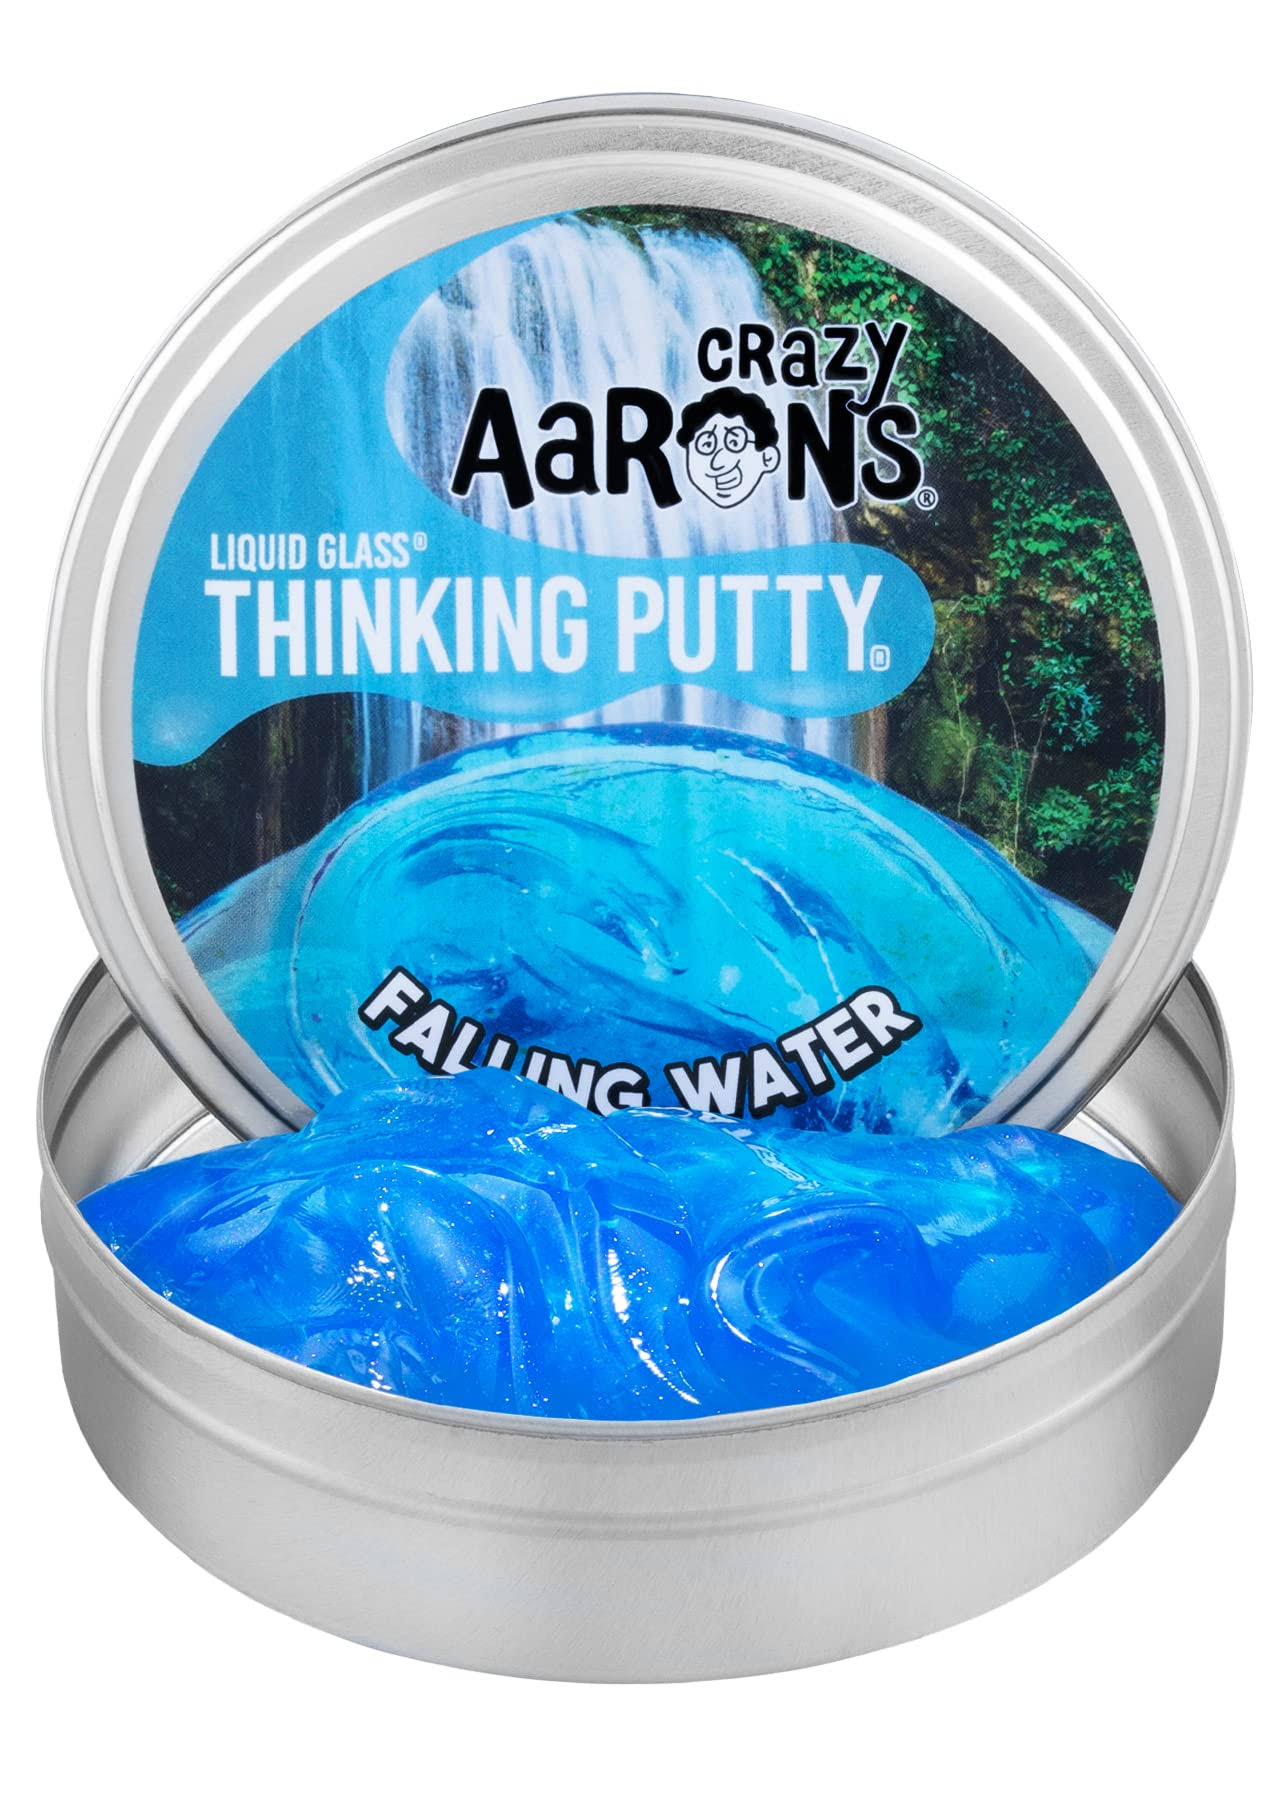 Crazy Aaron's Thinking Putty 4" Tin - Falling Water - Liquid Glass